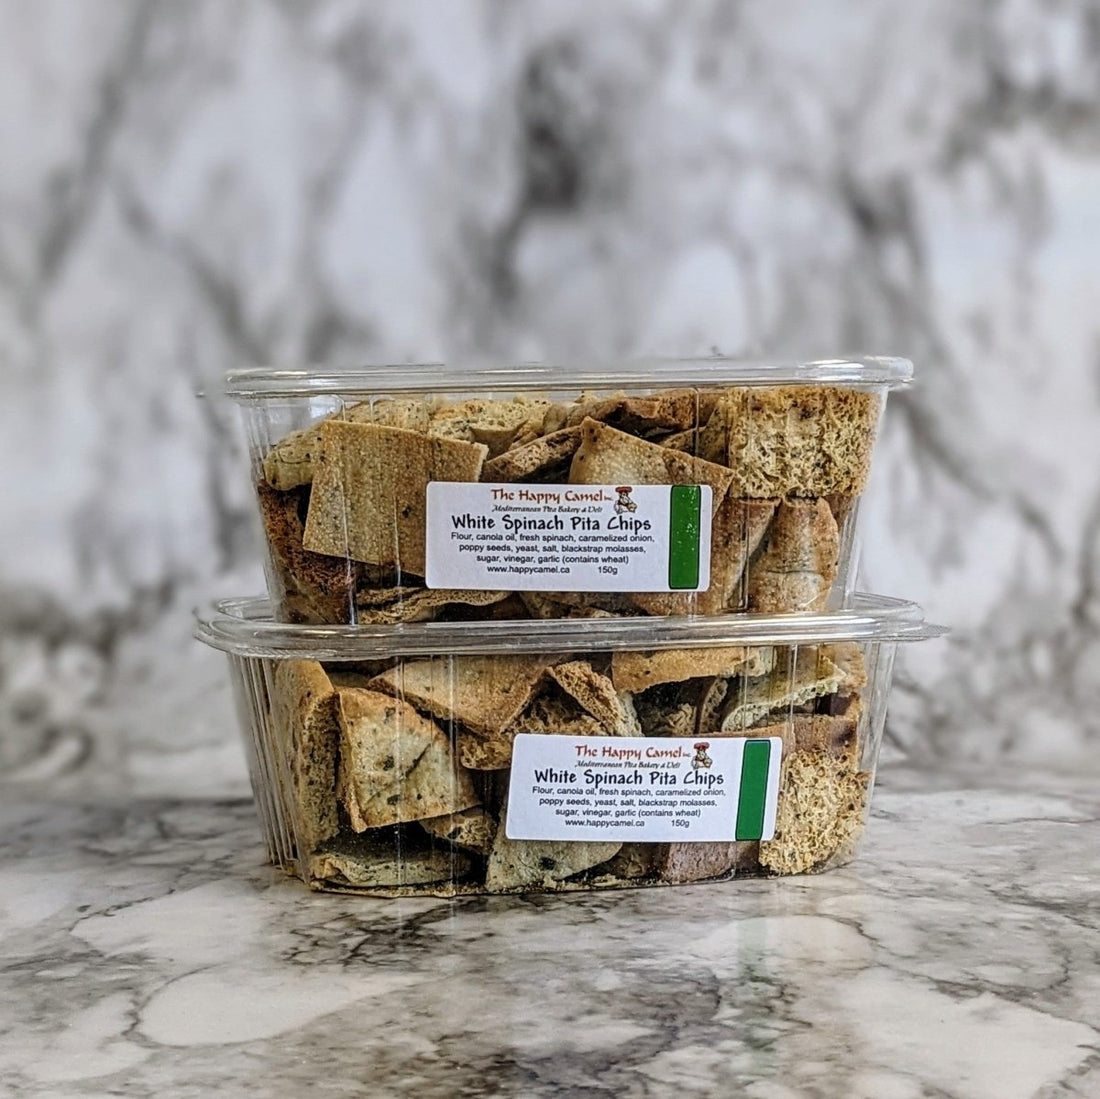 Spinach Pita Chips - 150g - Forage Market - The Happy Camel